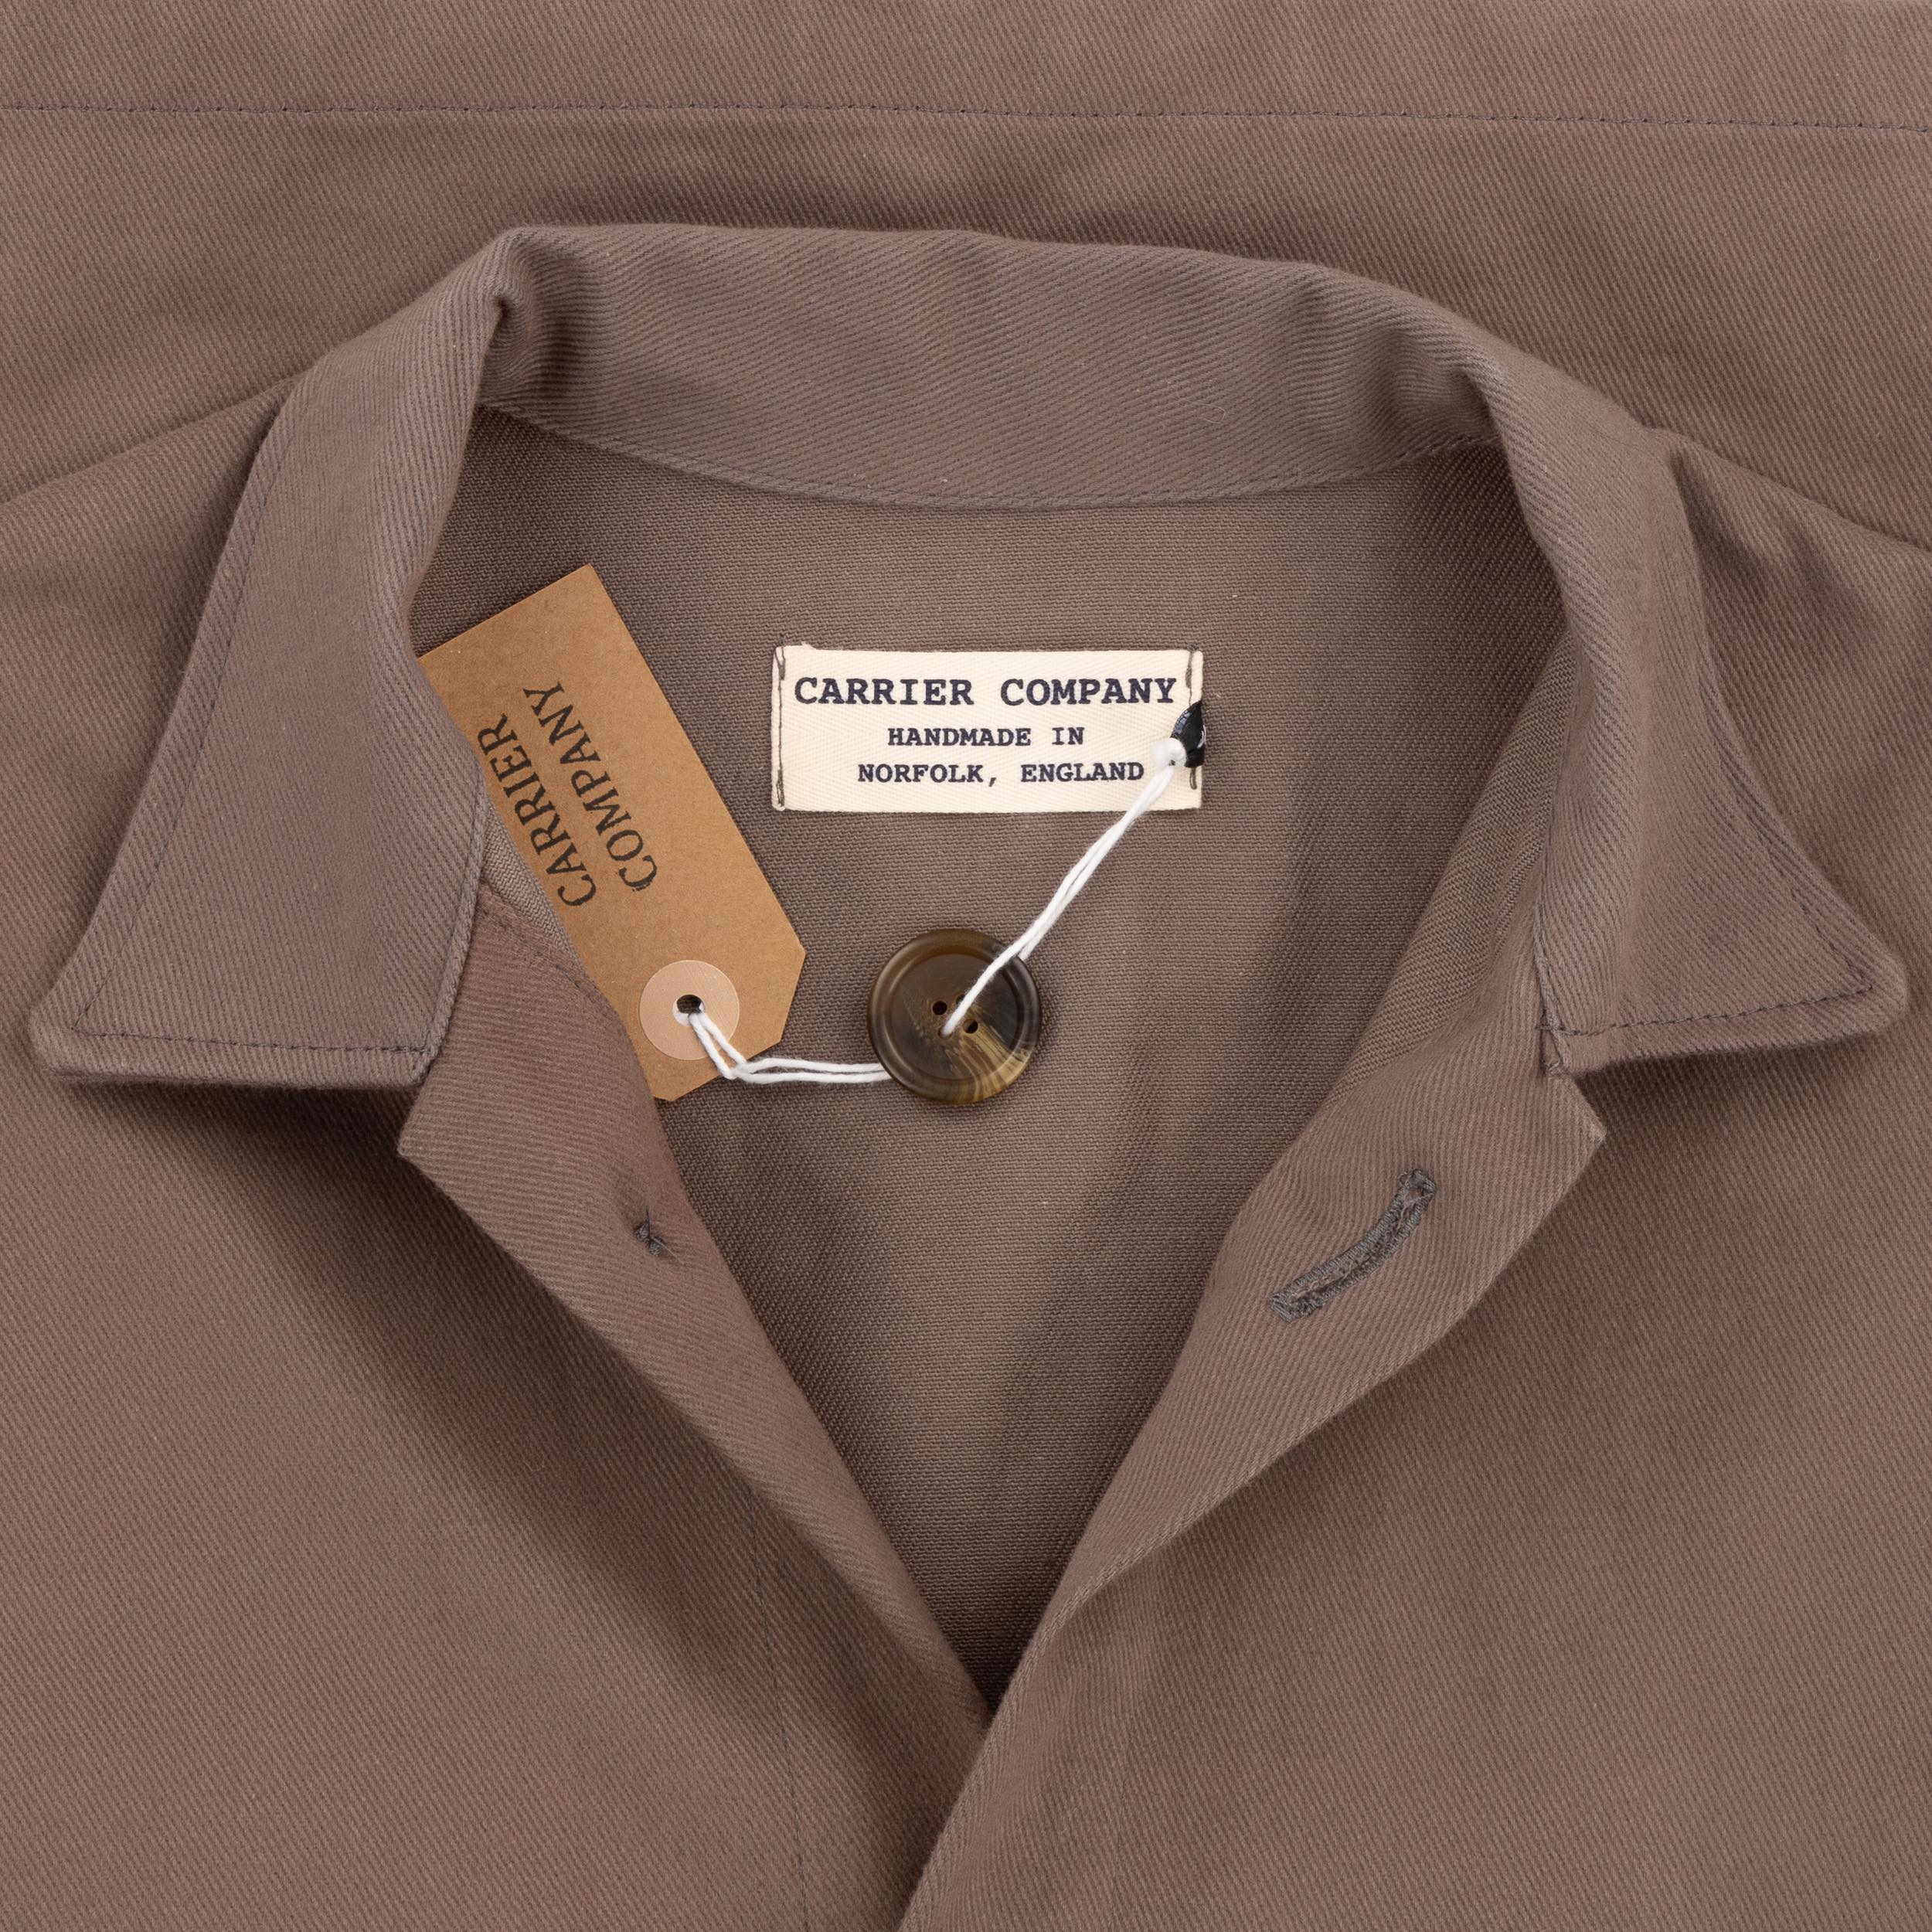 Close up of the Carrier Company Draught Jacket collar and label. Handmade in Norfolk, England.